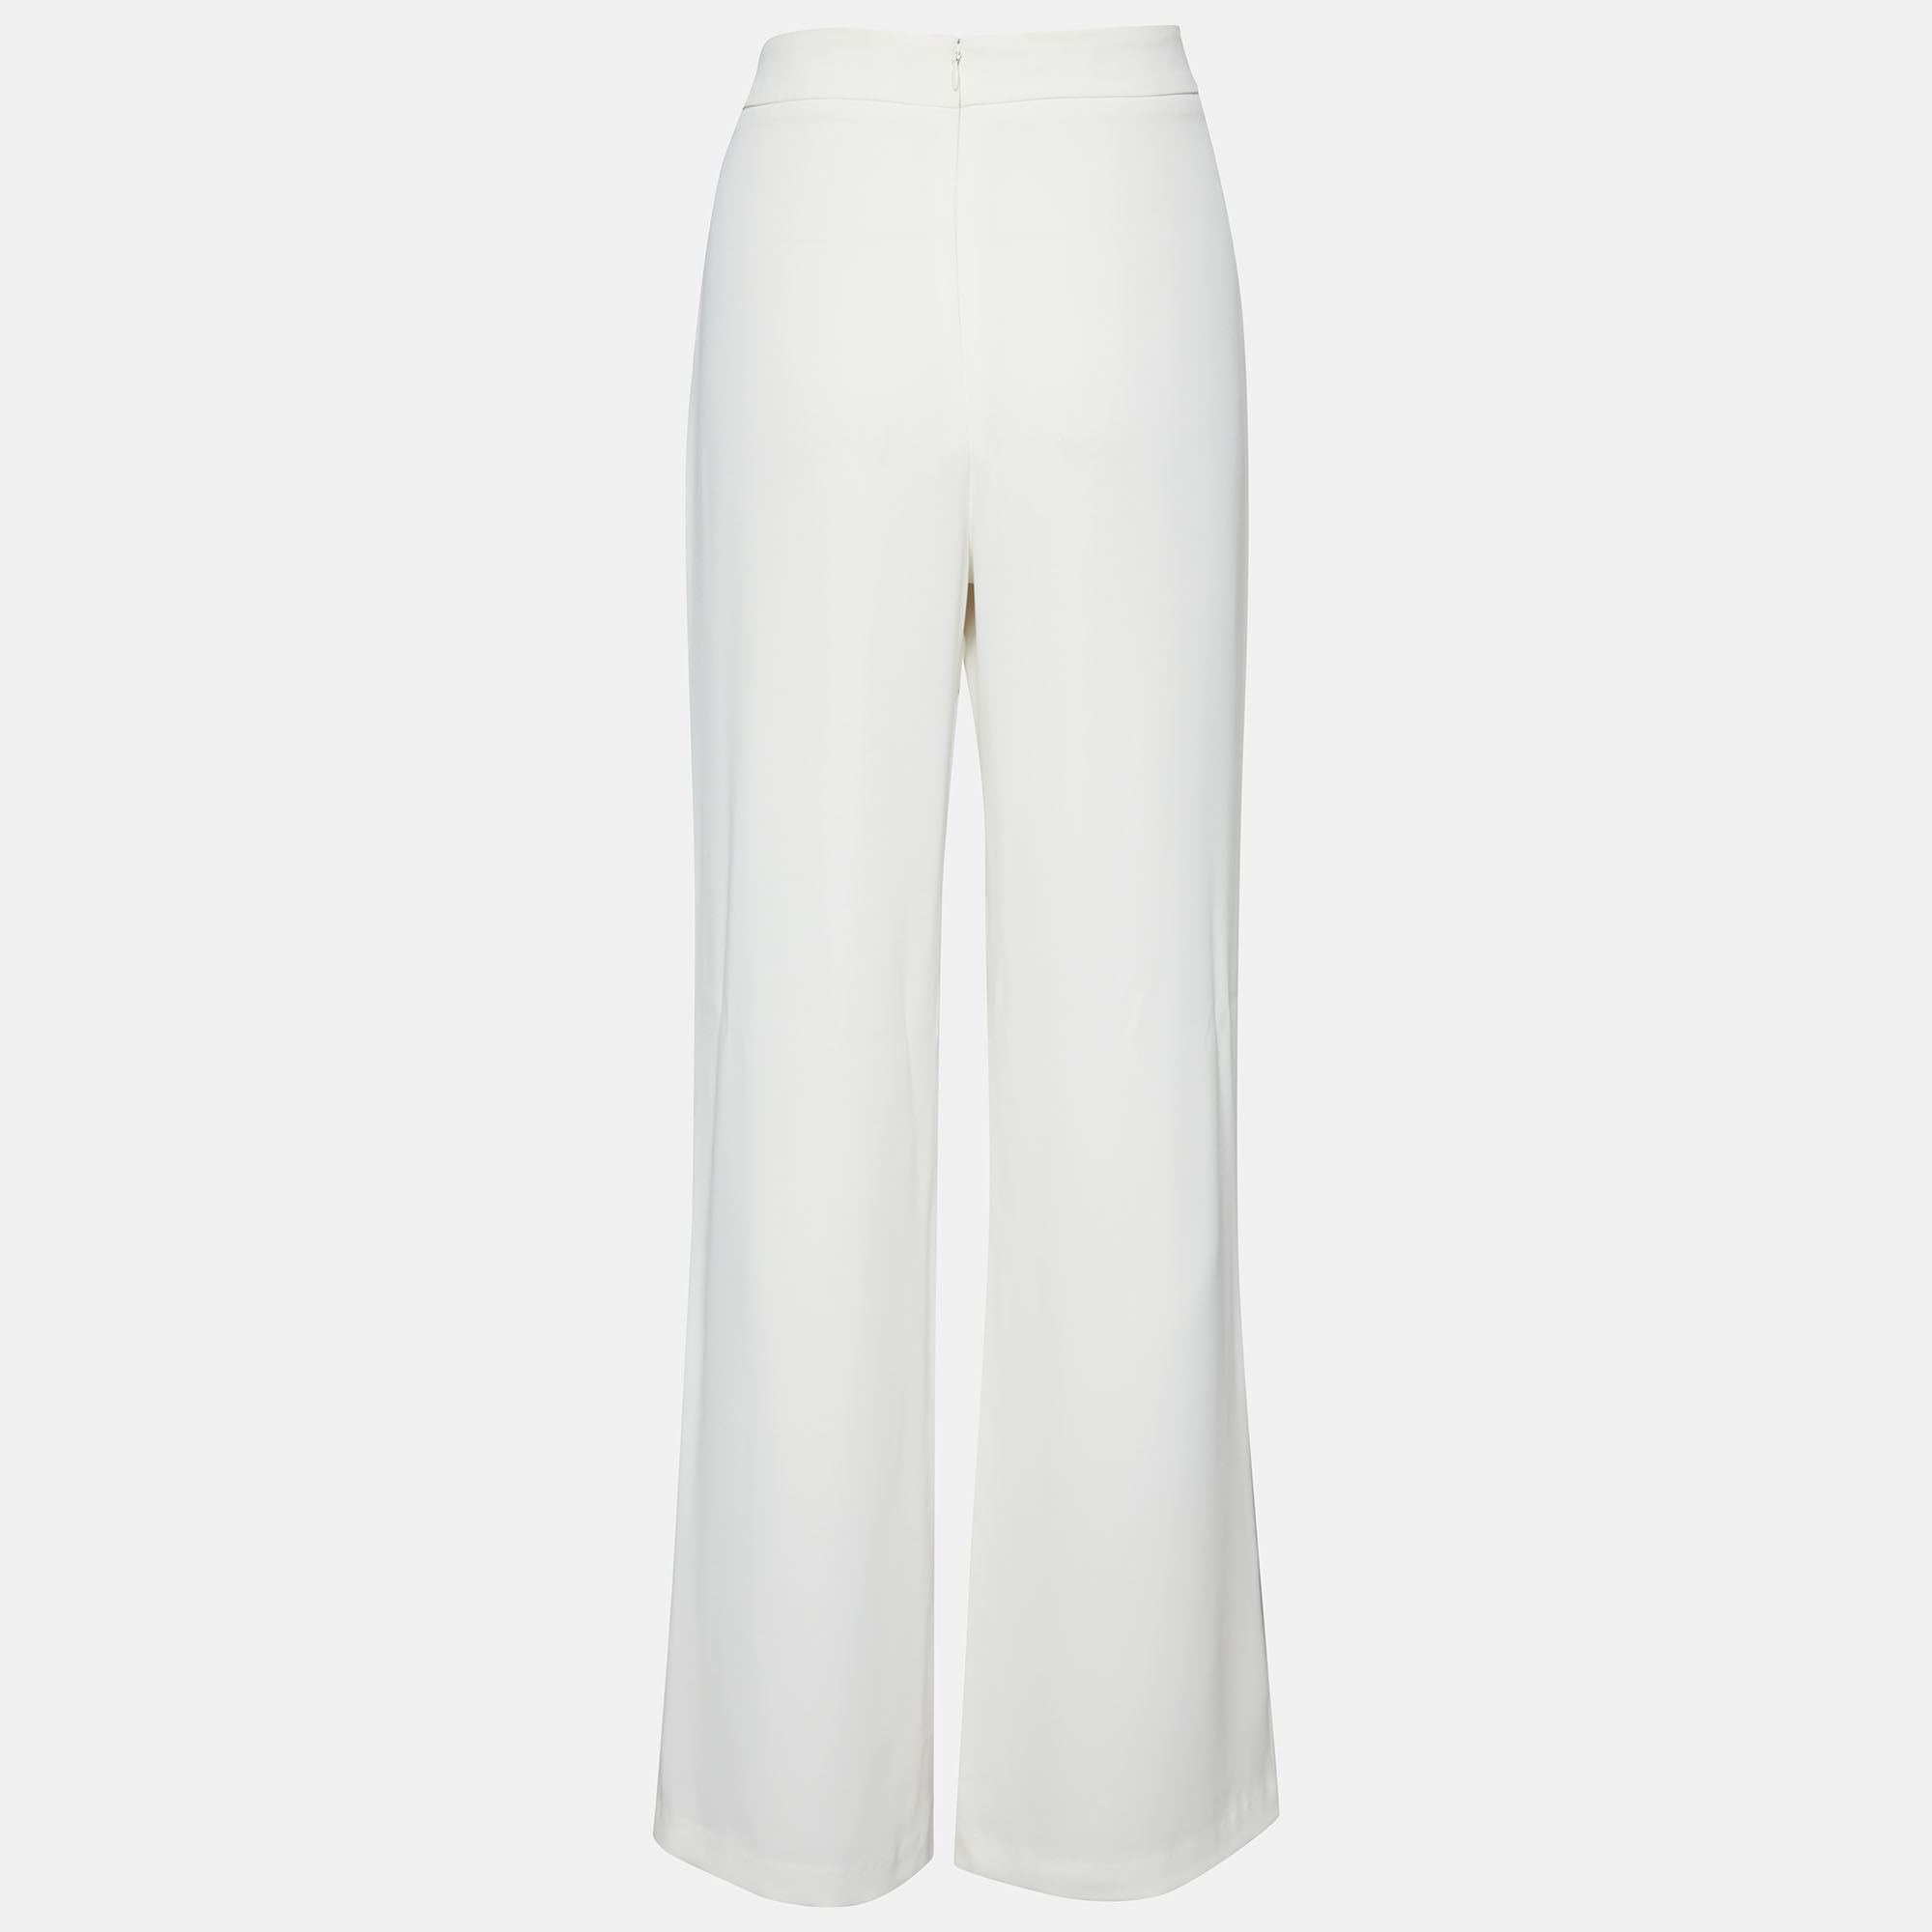 

Moschino Cheap and Chic Runway White Printed Crepe Embellished Wide Leg Pants